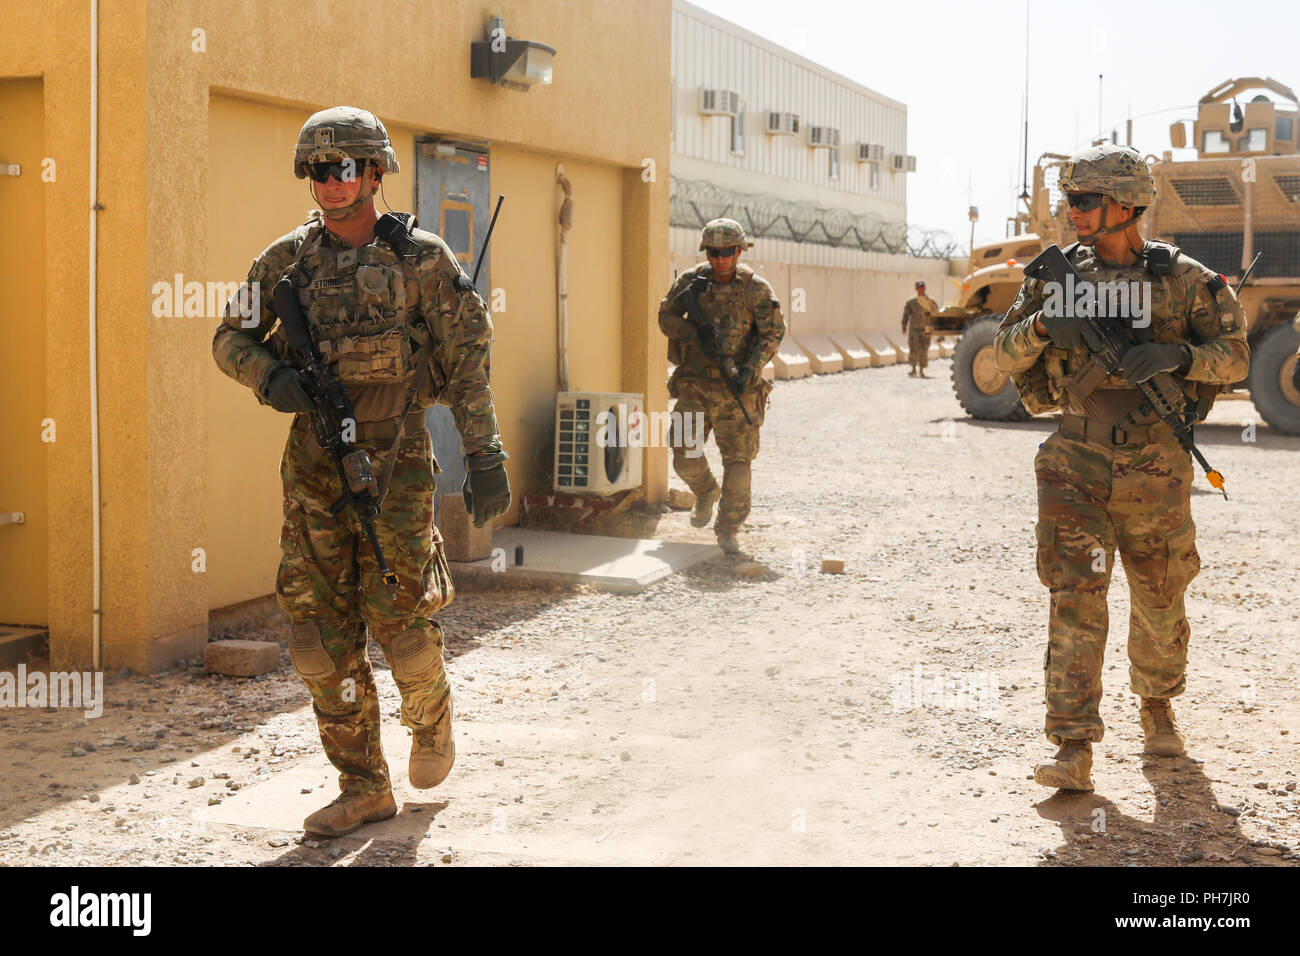 Kandahar Airfield, Afghanistan. 30th Aug, 2018. KANDAHAR AIRFIELD, Afghanistan (Aug. 16, 2018) -- U.S. Army Soldiers from 1st Battalion, 12th Infantry Regiment, 2nd Infantry Brigade Combat Team, 4th Infantry Division, walk into a simulated village, Aug. 16, 2018, during a Guardian Angel situational training exercise in Kandahar Airfield, Afghanistan. Soldiers from Alpha Company, 1st Bn., 12th Inf. Reg. are responsible for providing Guardian Angel Soldiers for missions where advisors from Train Advice and Assist Command-South conduct with their Afghan National Army and Afghan National Police Stock Photo